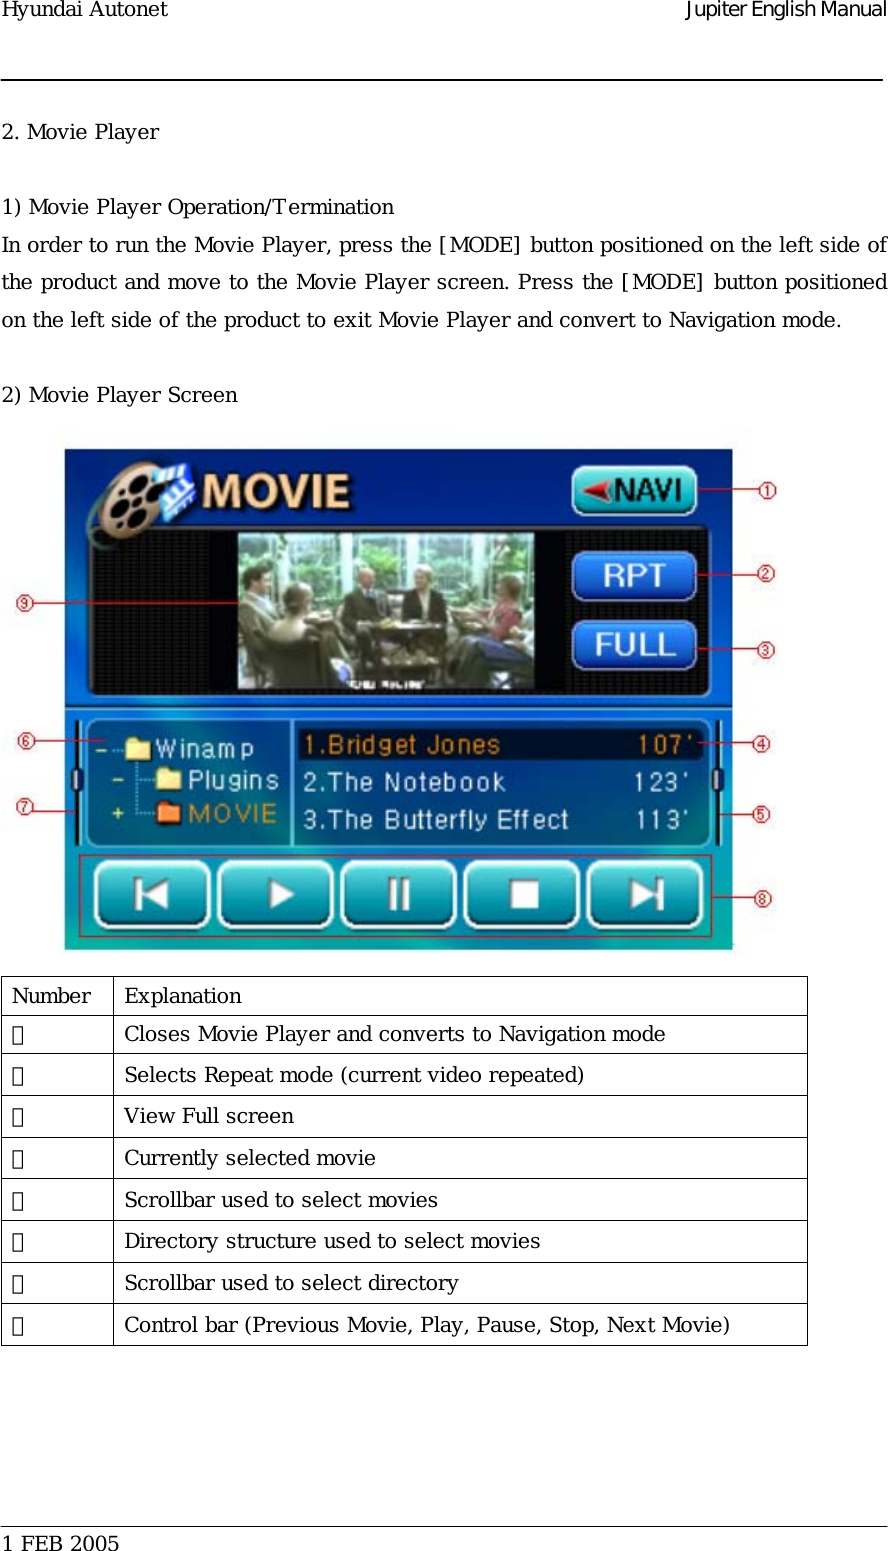 Hyundai Autonet    Jupiter English Manual 2. Movie Player  1) Movie Player Operation/Termination In order to run the Movie Player, press the [MODE] button positioned on the left side of the product and move to the Movie Player screen. Press the [MODE] button positioned on the left side of the product to exit Movie Player and convert to Navigation mode.  2) Movie Player Screen  Number  Explanation ①  Closes Movie Player and converts to Navigation mode ②  Selects Repeat mode (current video repeated) ③  View Full screen  ④  Currently selected movie ⑤  Scrollbar used to select movies ⑥  Directory structure used to select movies ⑦  Scrollbar used to select directory ⑧  Control bar (Previous Movie, Play, Pause, Stop, Next Movie)   1 FEB 2005    